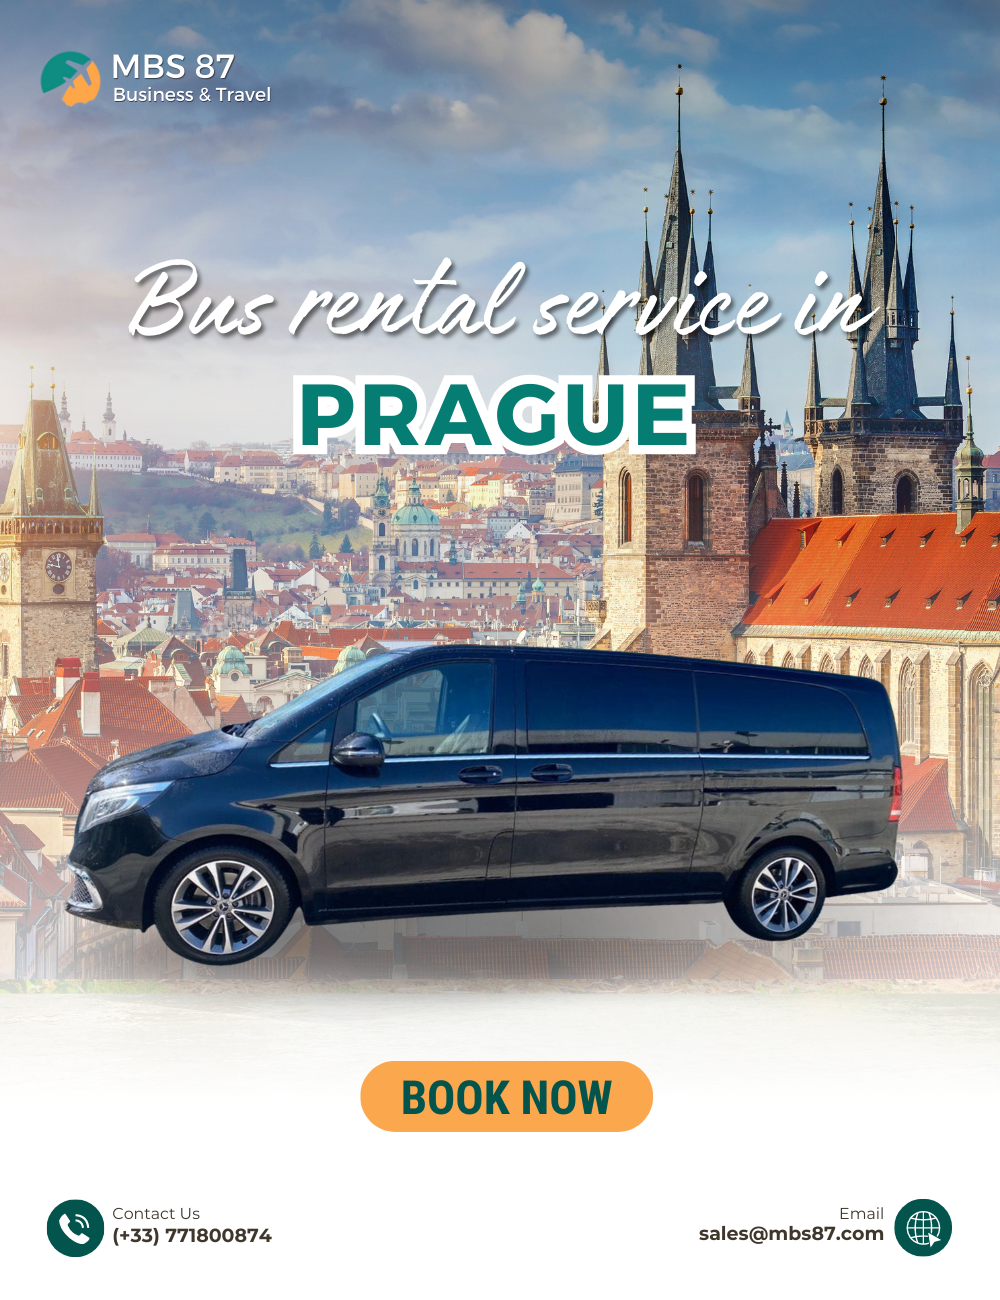 Exploring Europe: A Guide to Long Distance Bus Travel from Prague